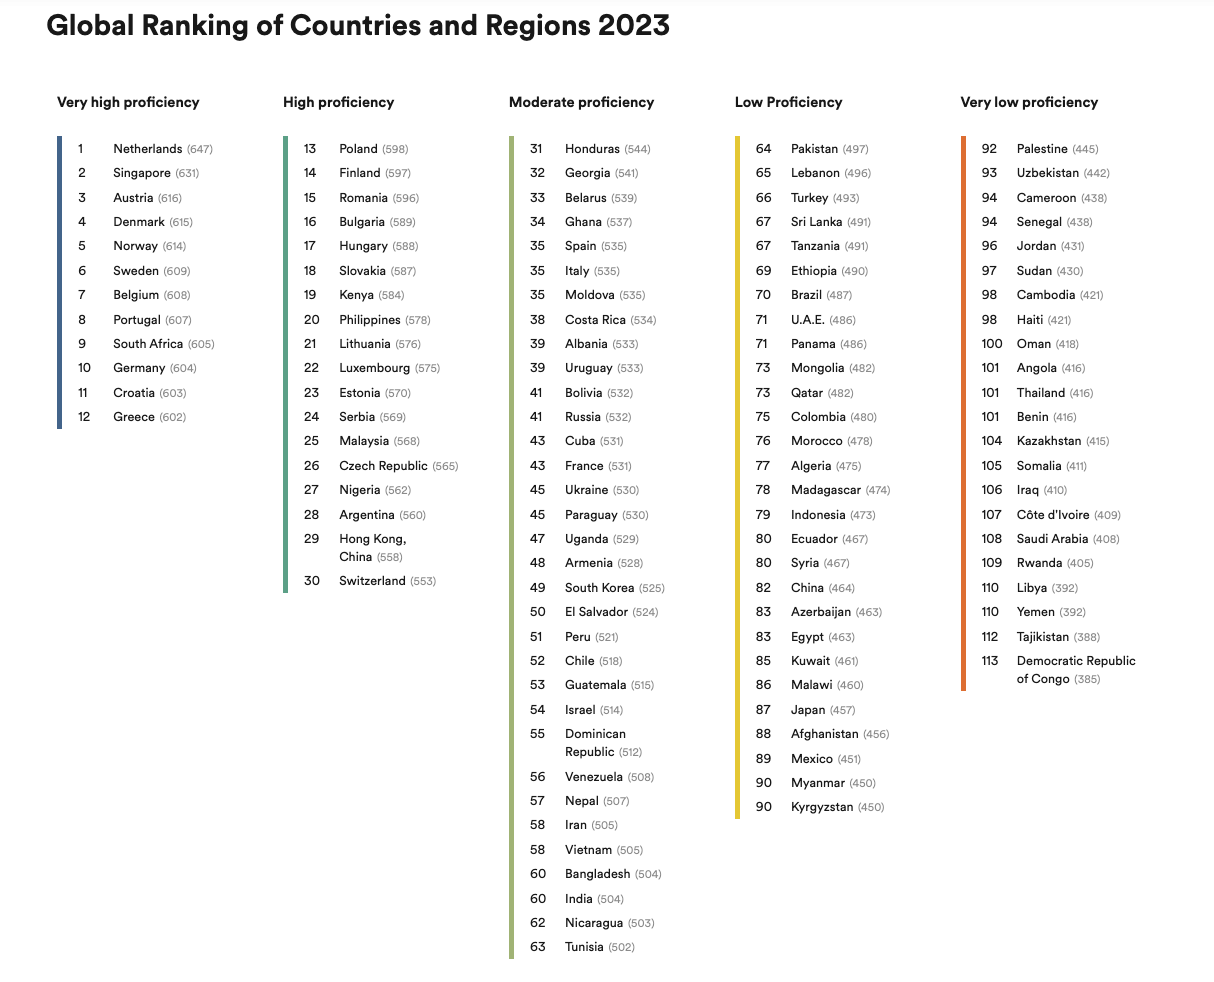 Global-Ranking-of-Countries-and-Regions-2023